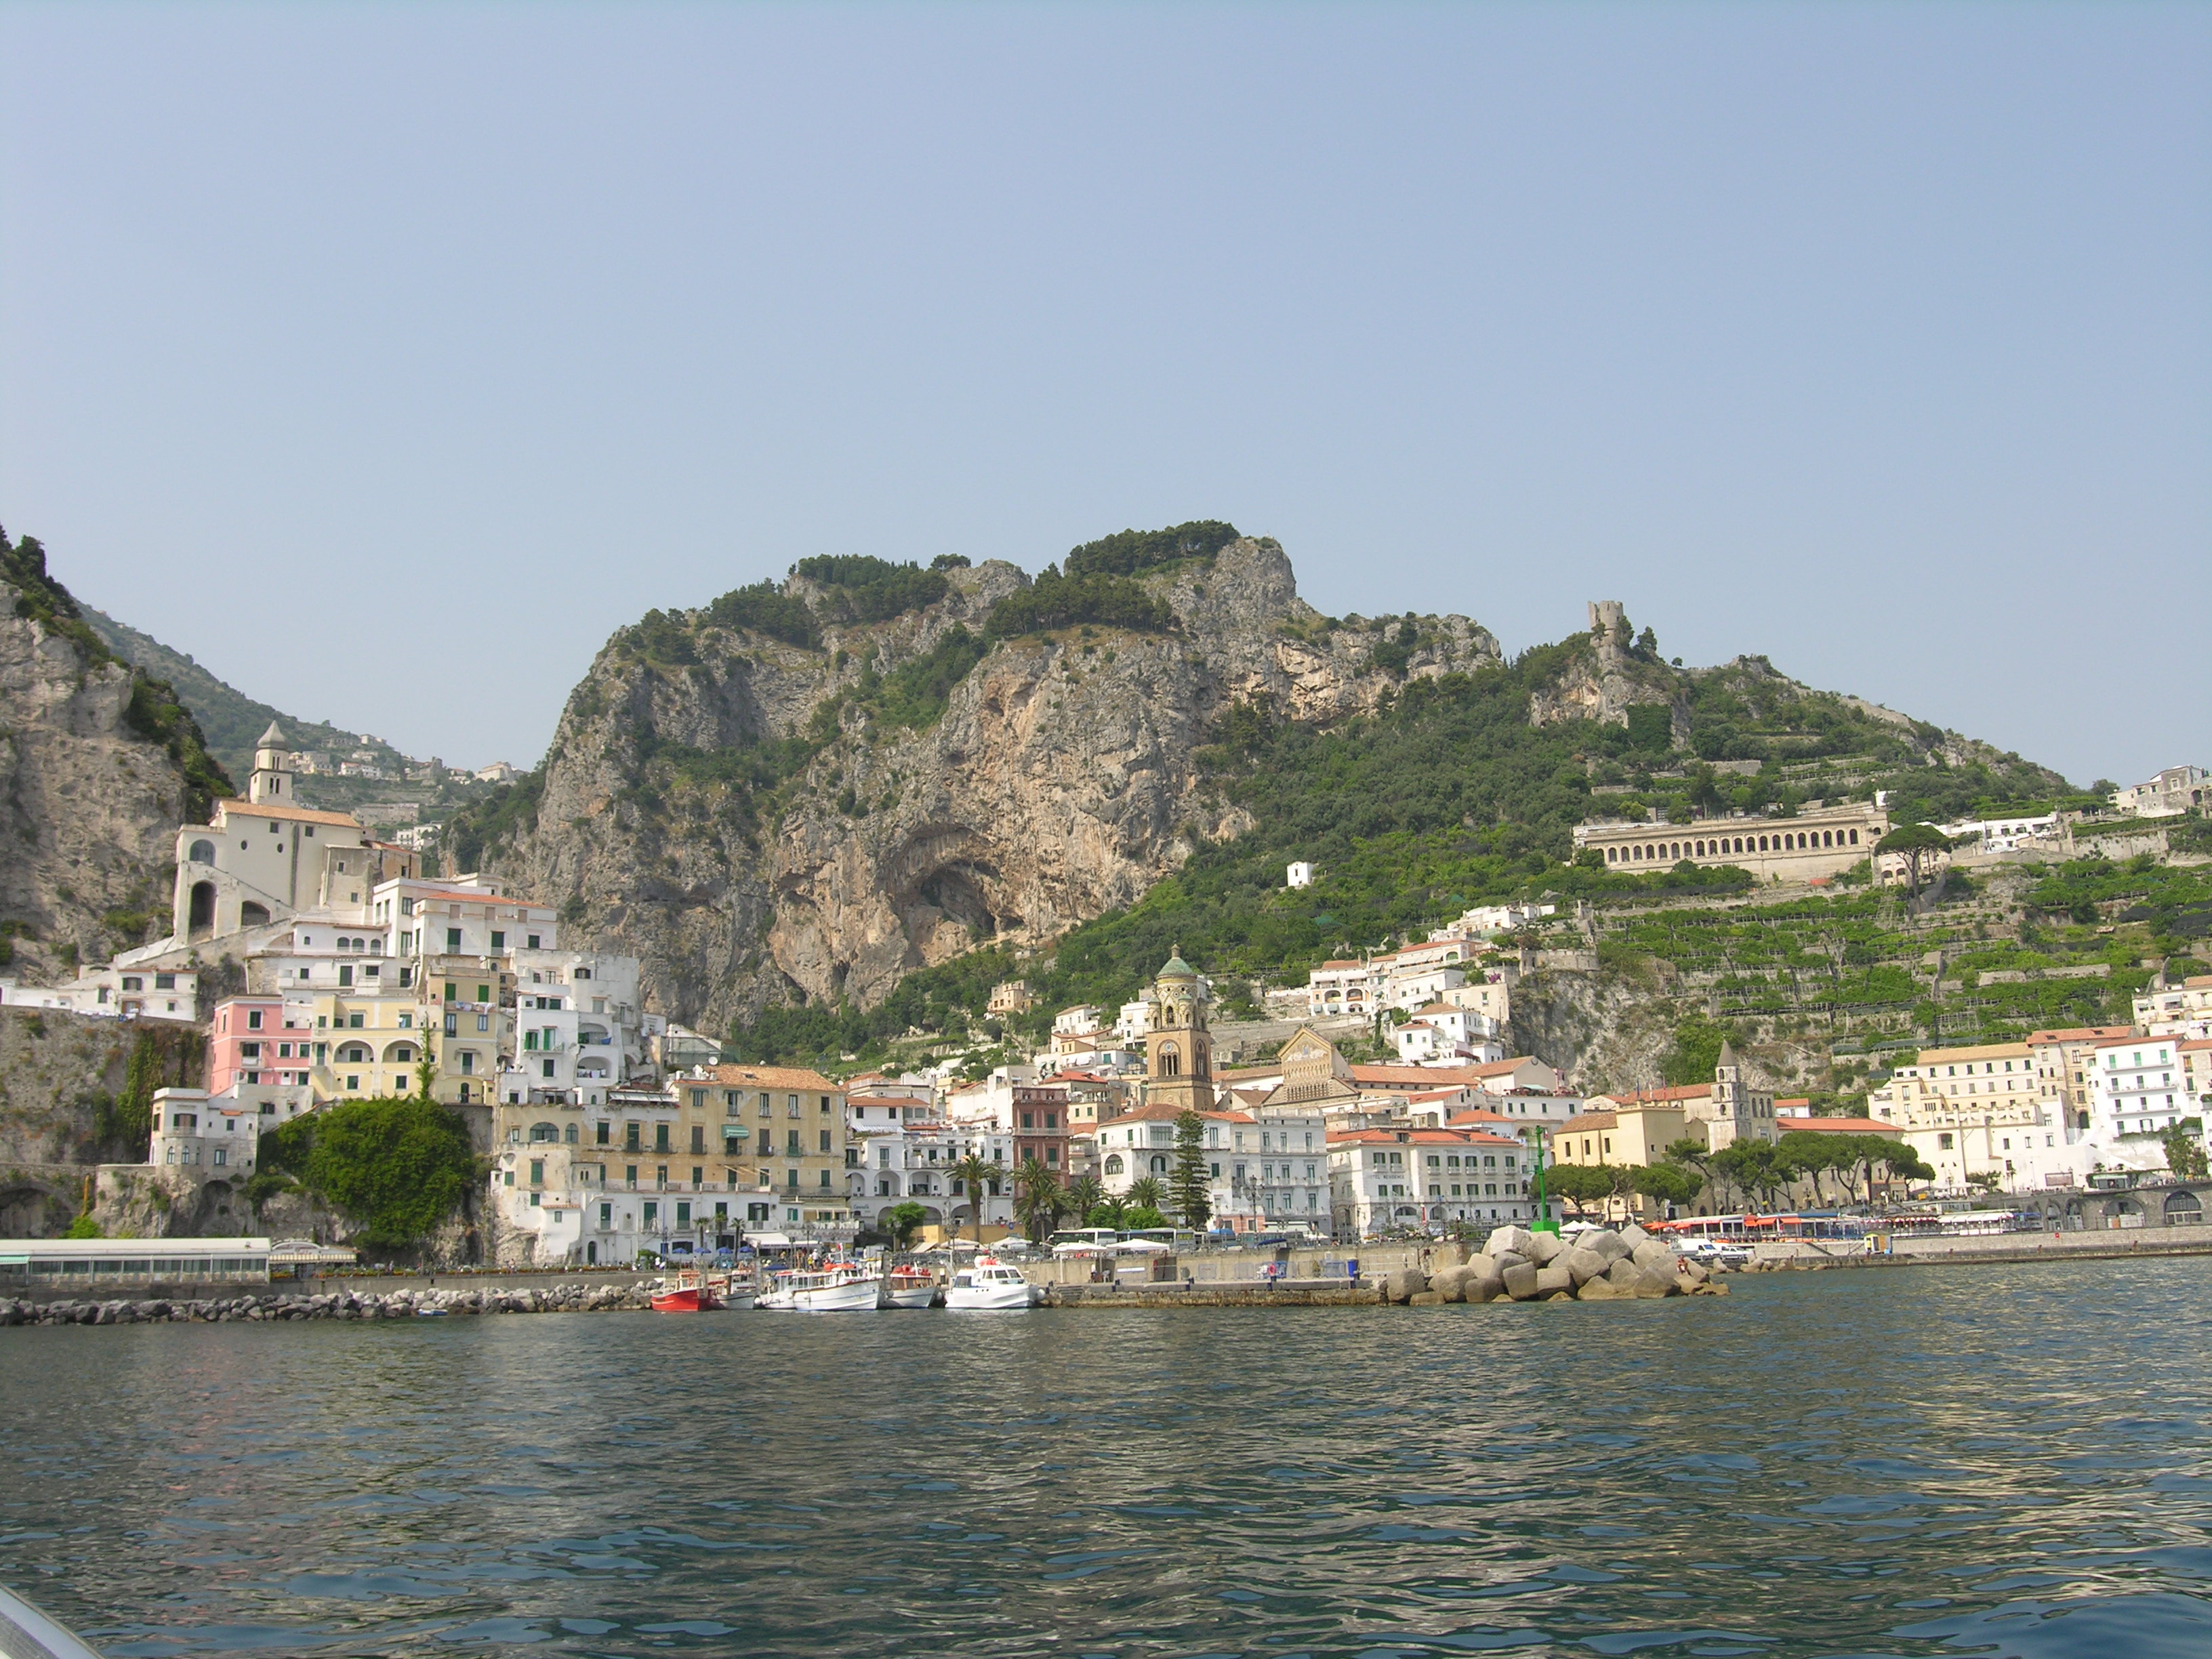 4. Epicurean Delights: Savoring Gourmet Cuisine in Amalfi and French Riviera